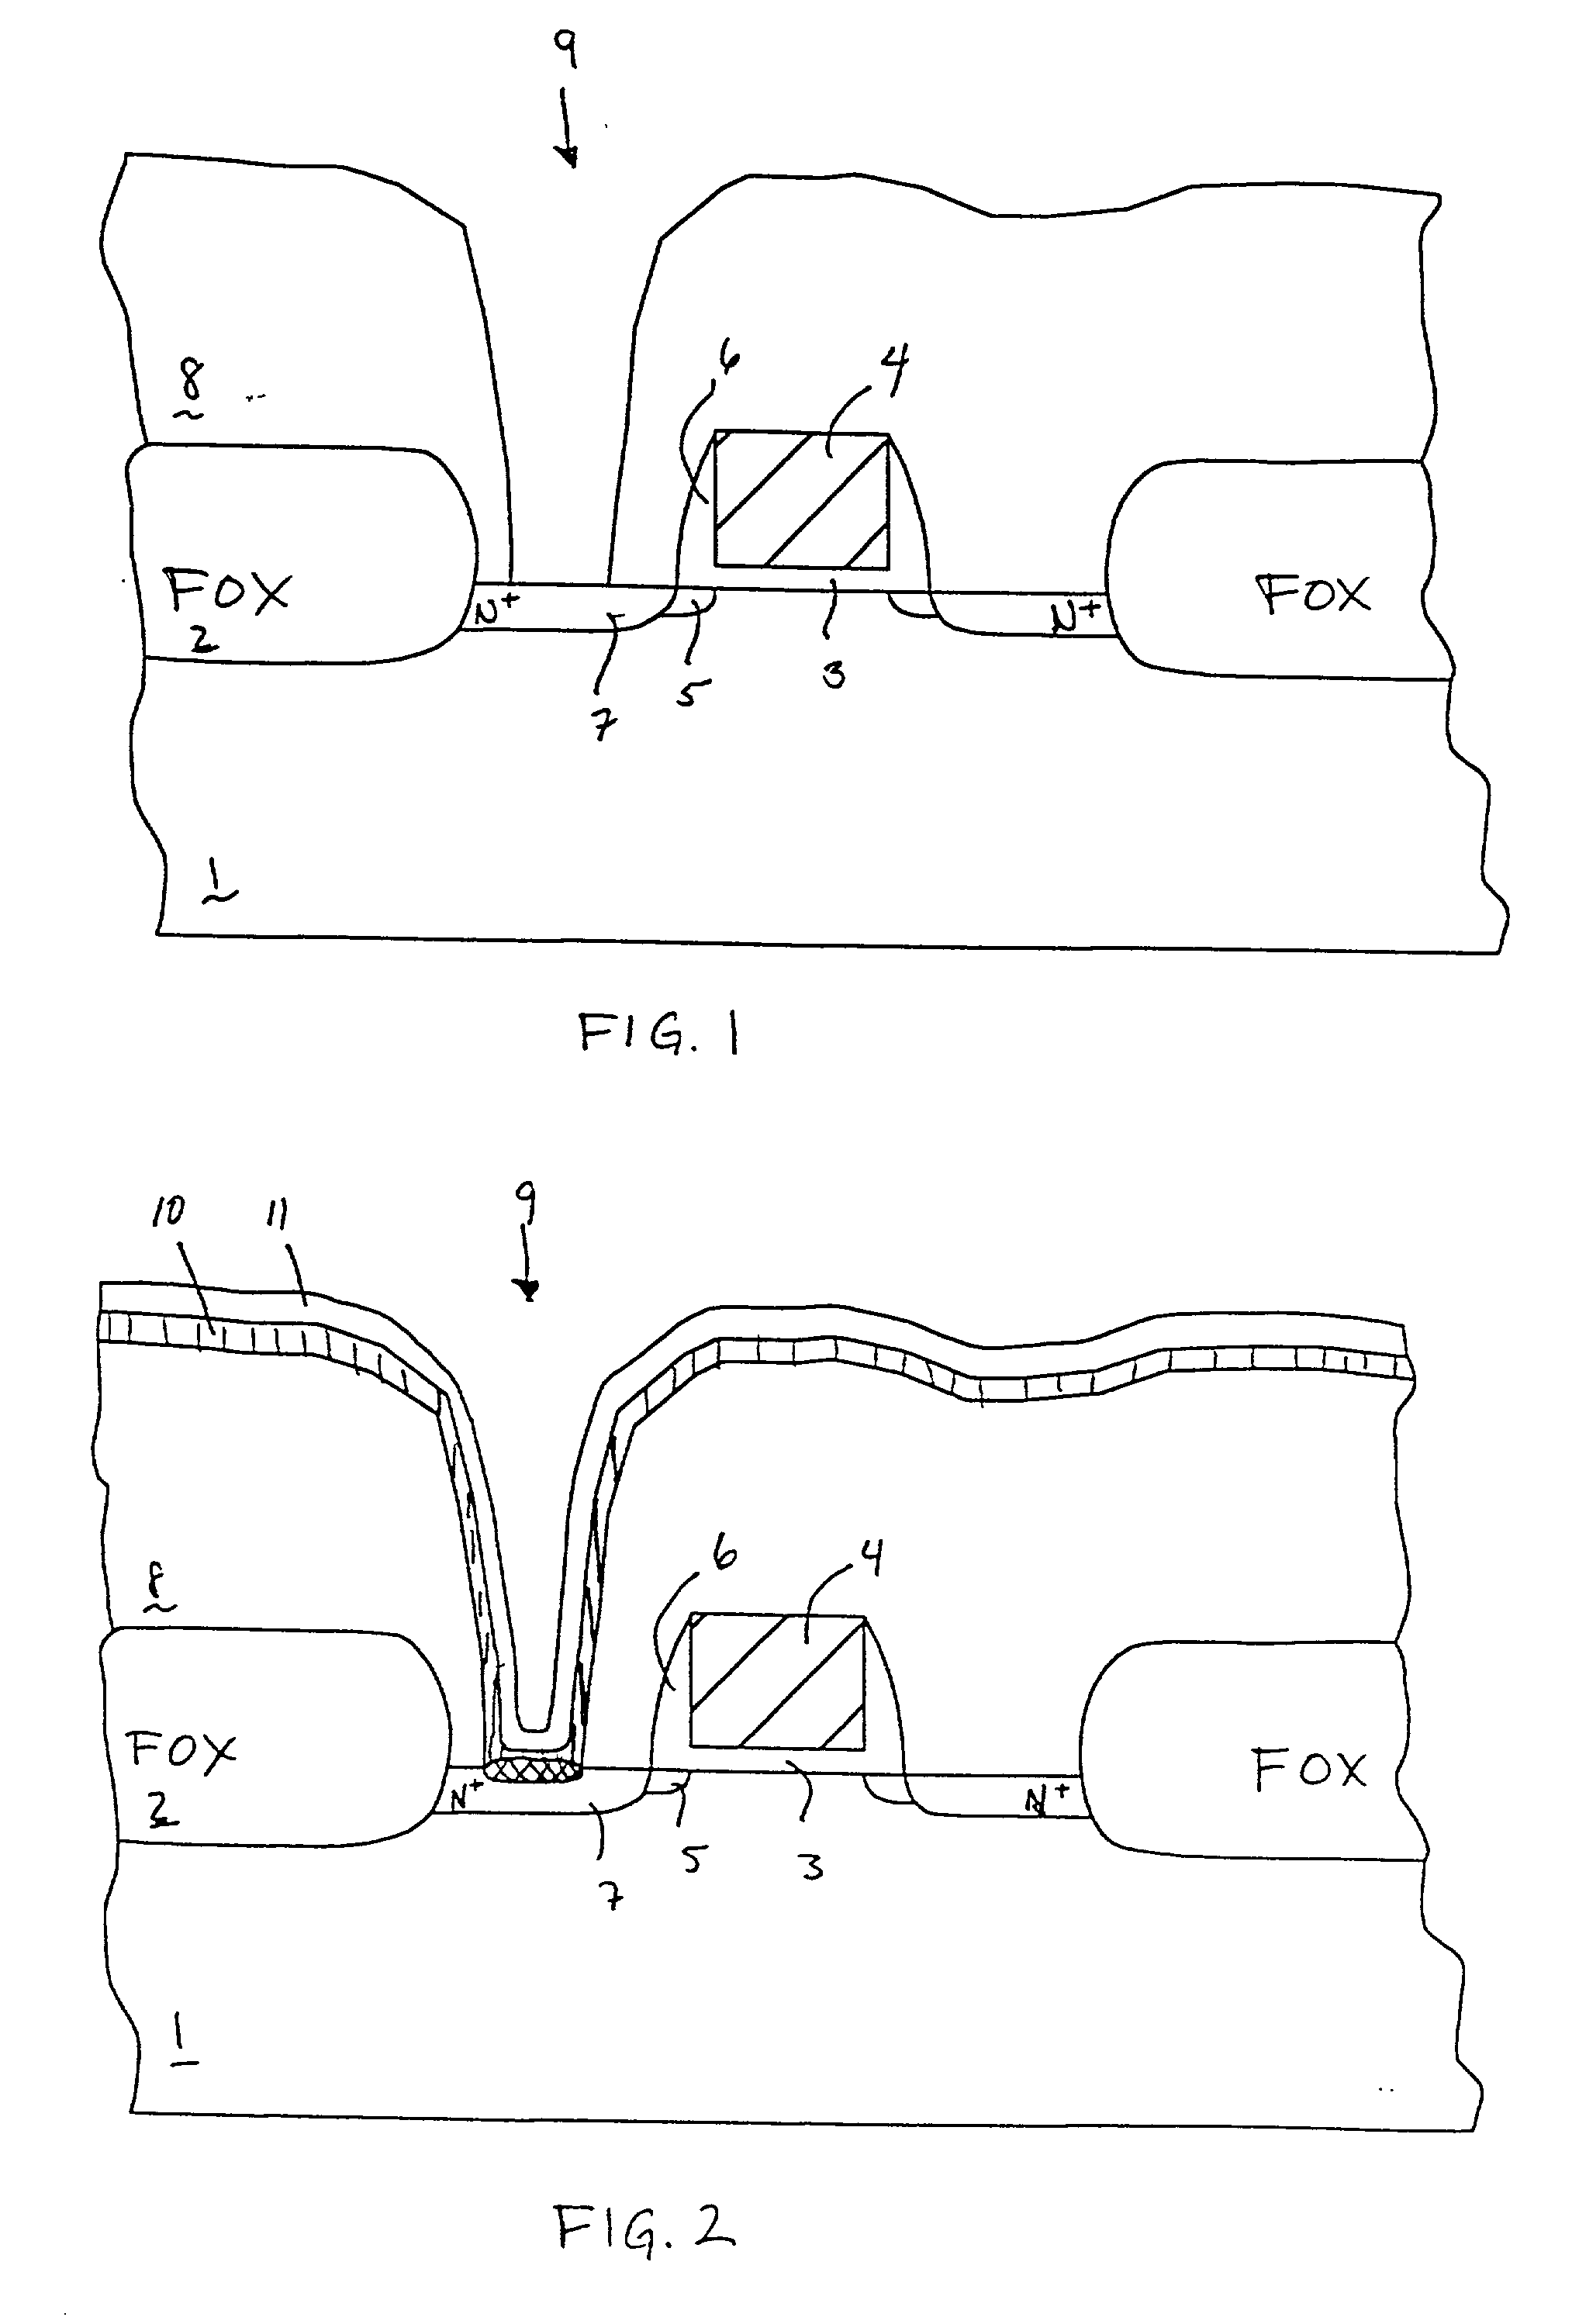 Composite metallization process for filling high aspect ratio contact holes